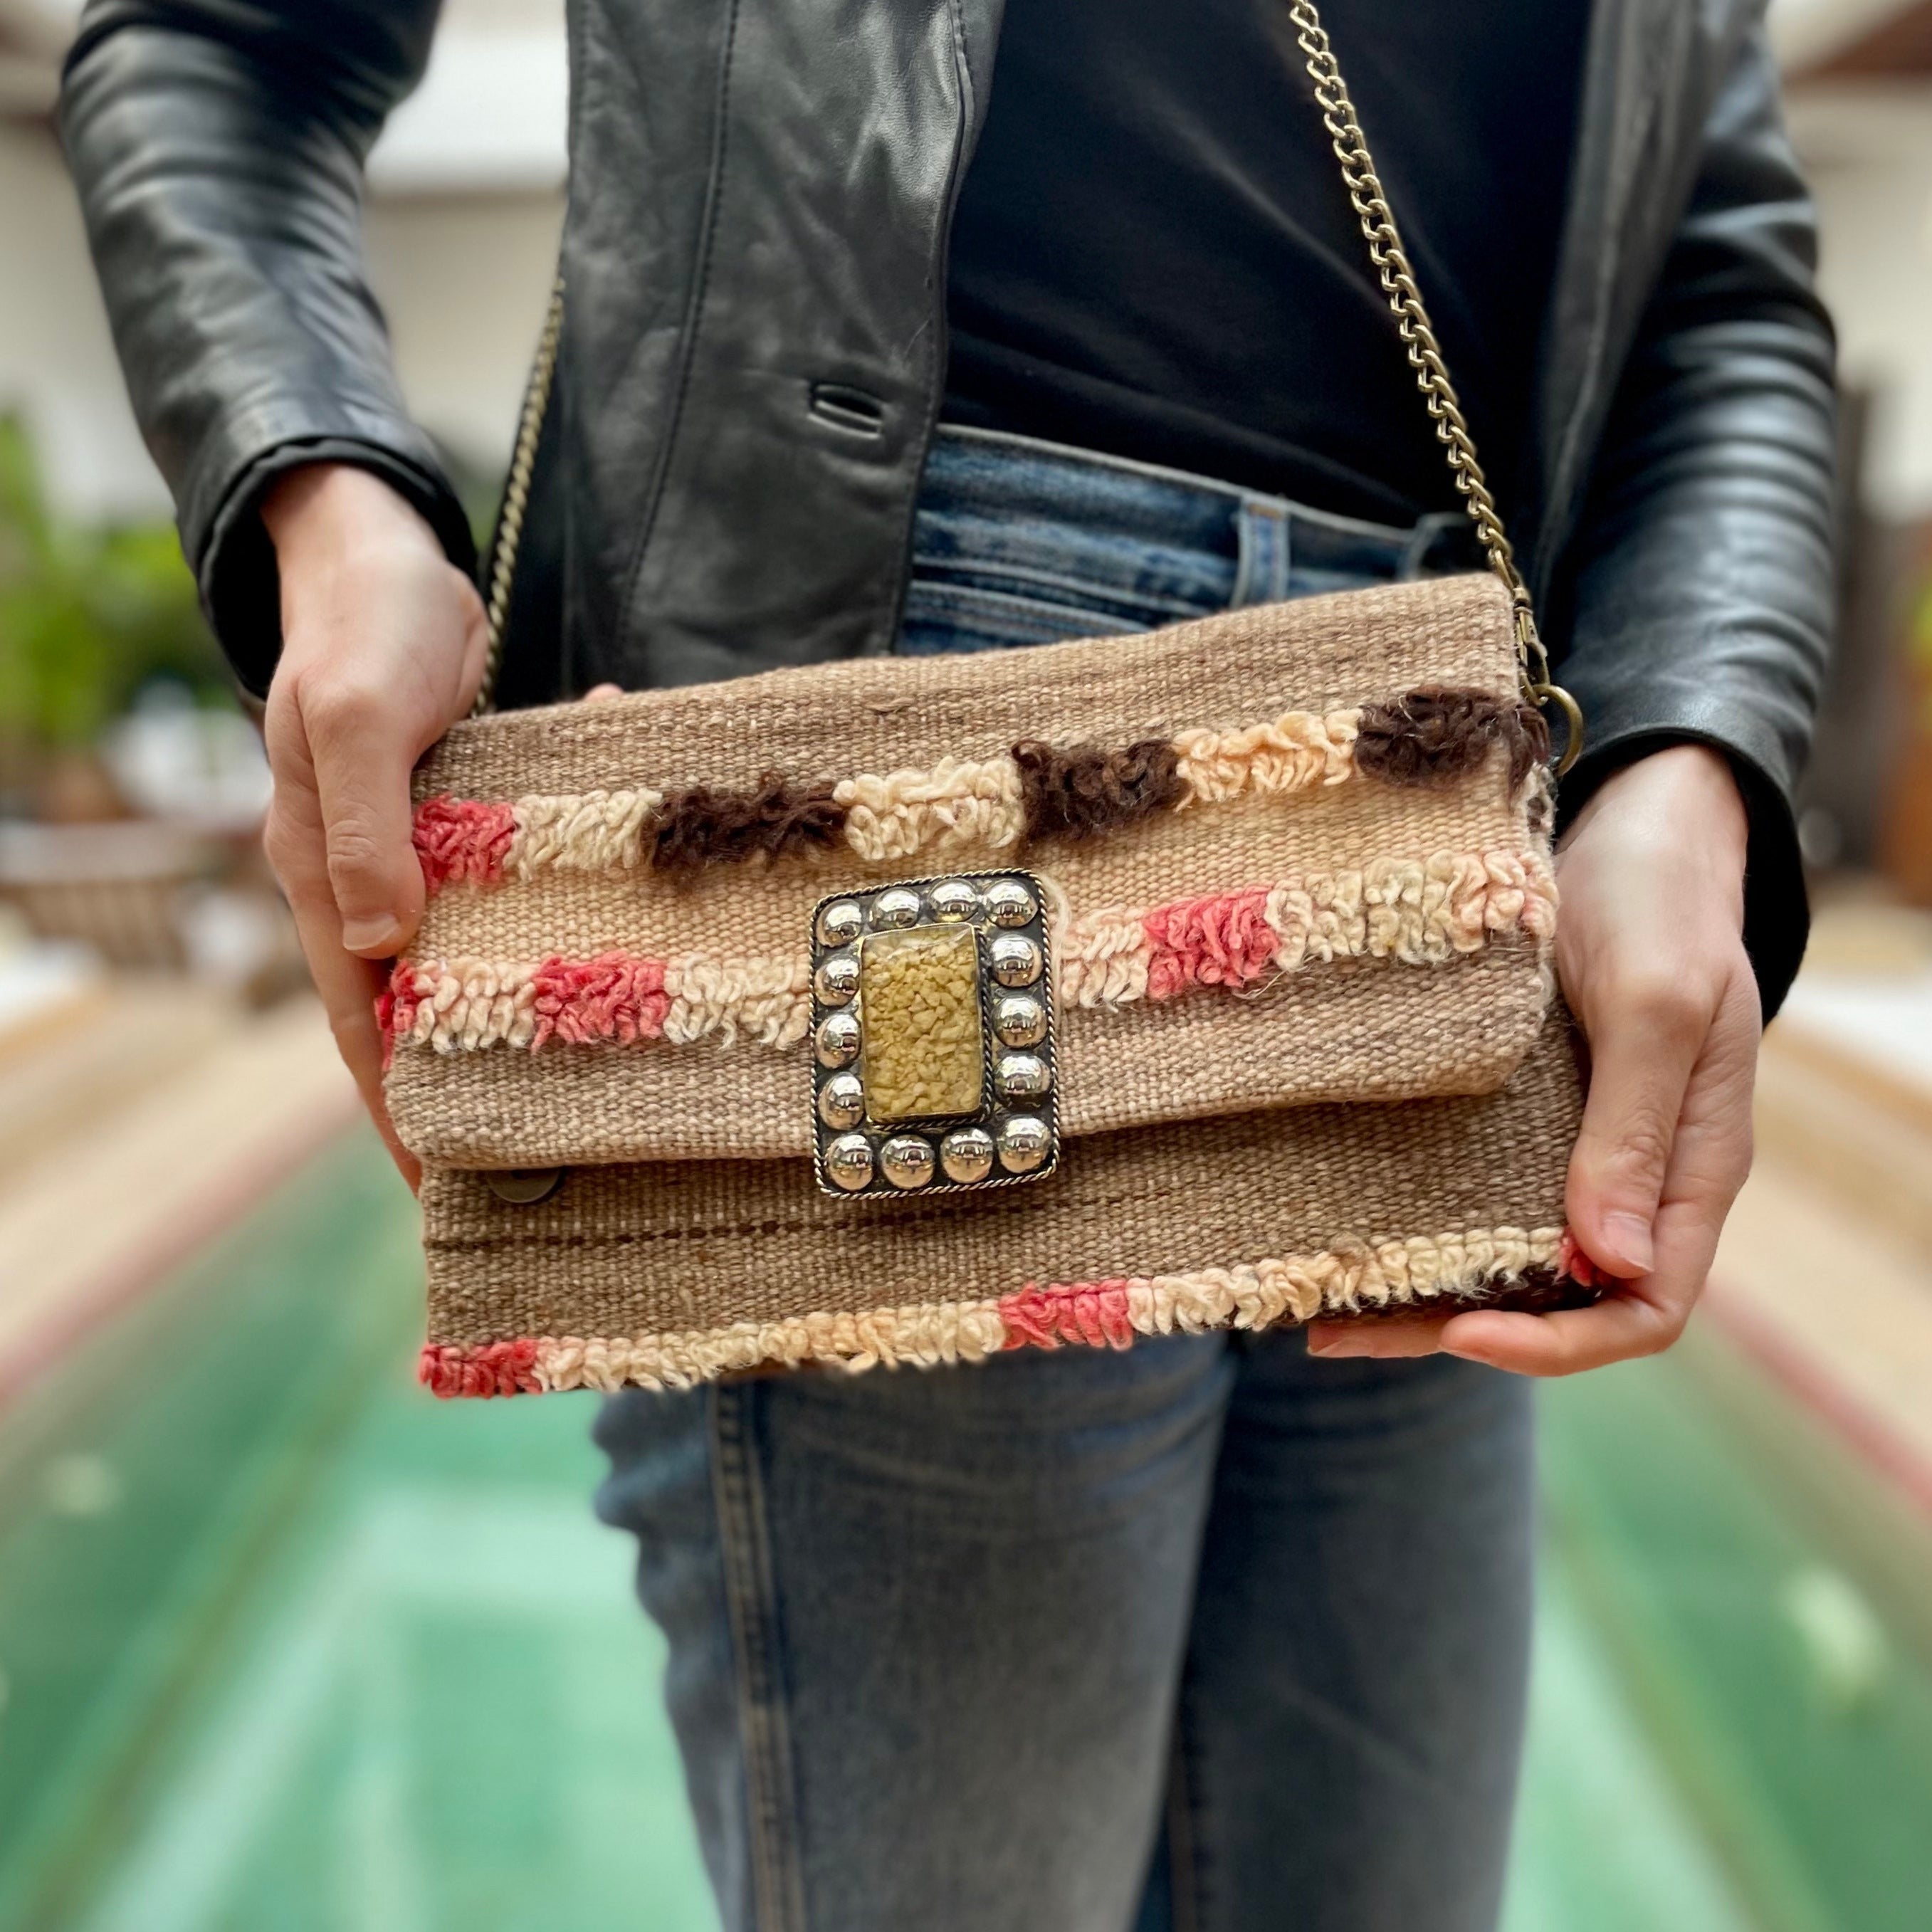 Girls Night Out Upcycled Clutch